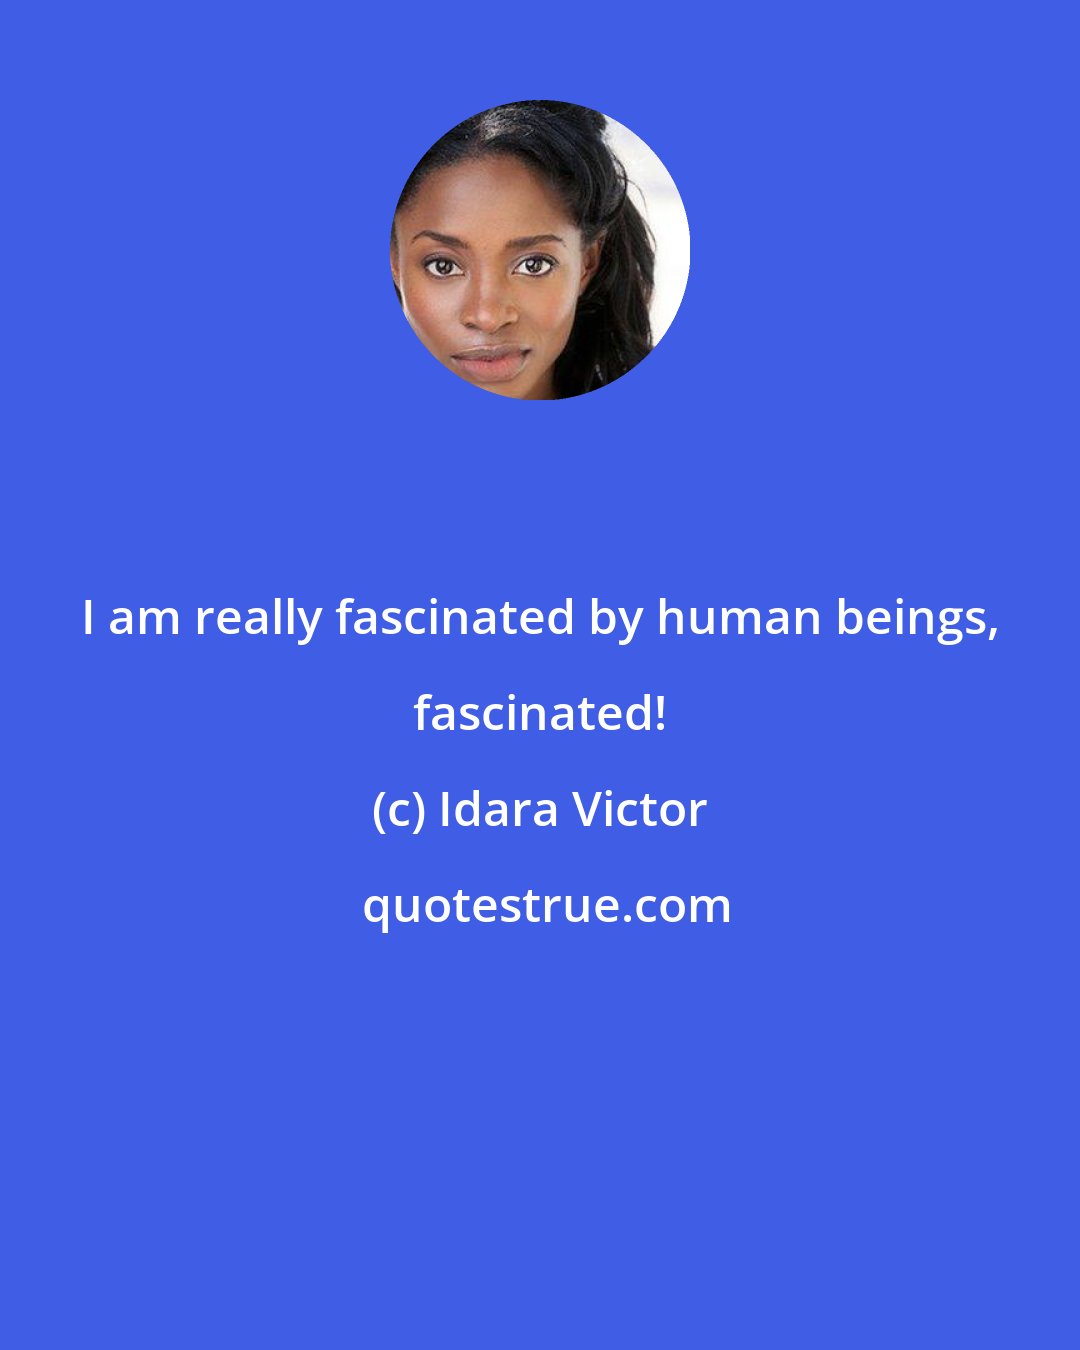 Idara Victor: I am really fascinated by human beings, fascinated!